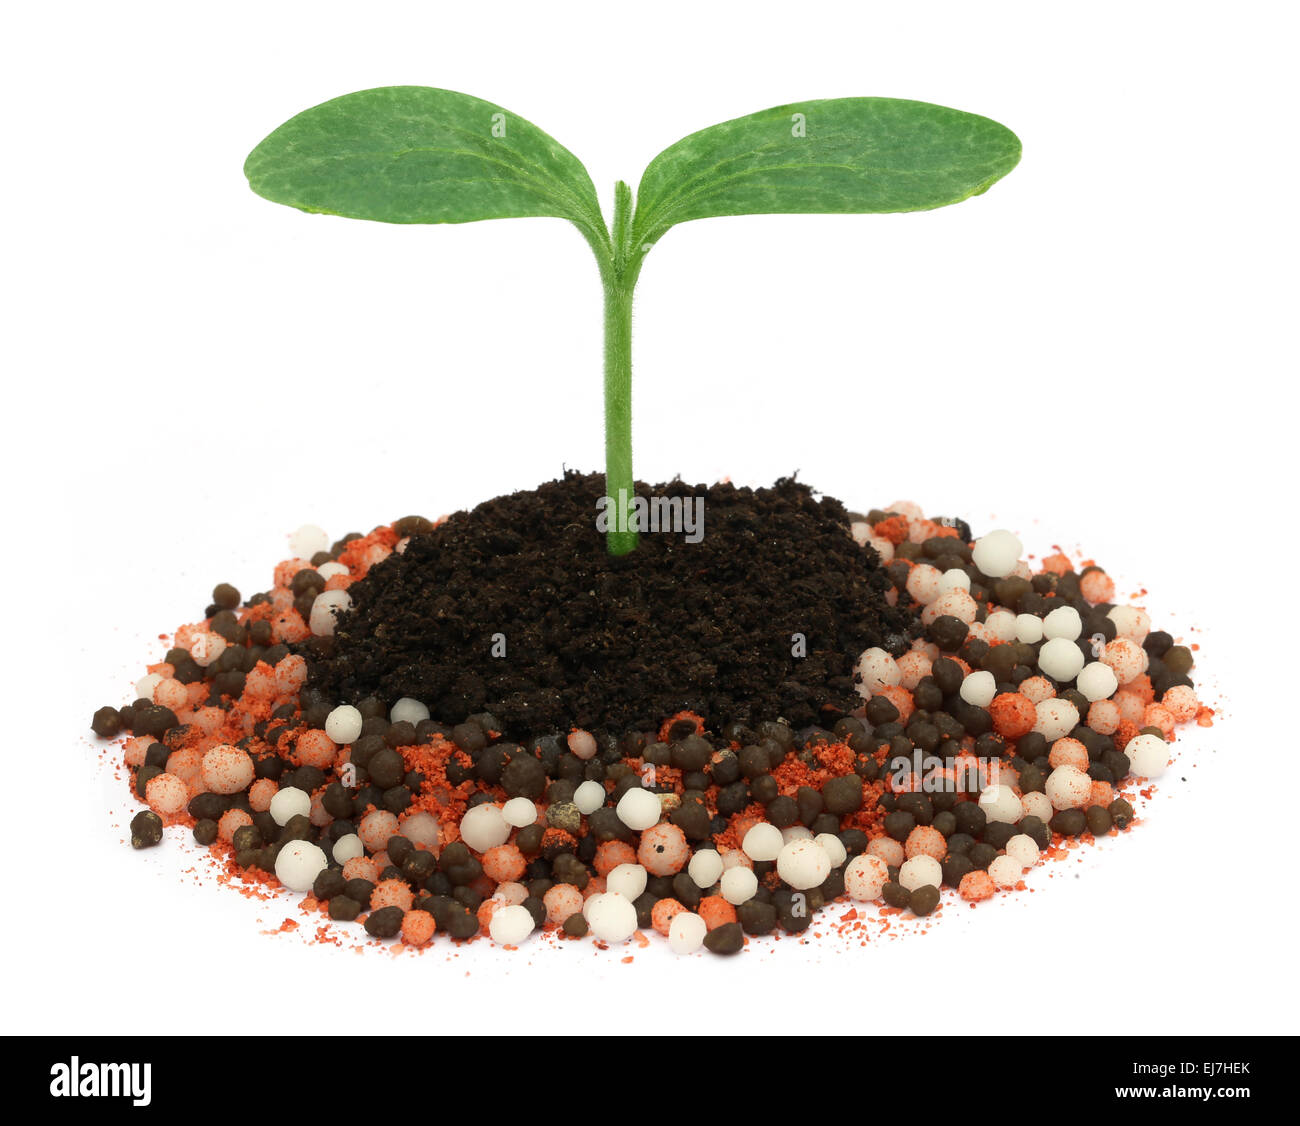 Plant in chemical fertilizer over white background Stock Photo